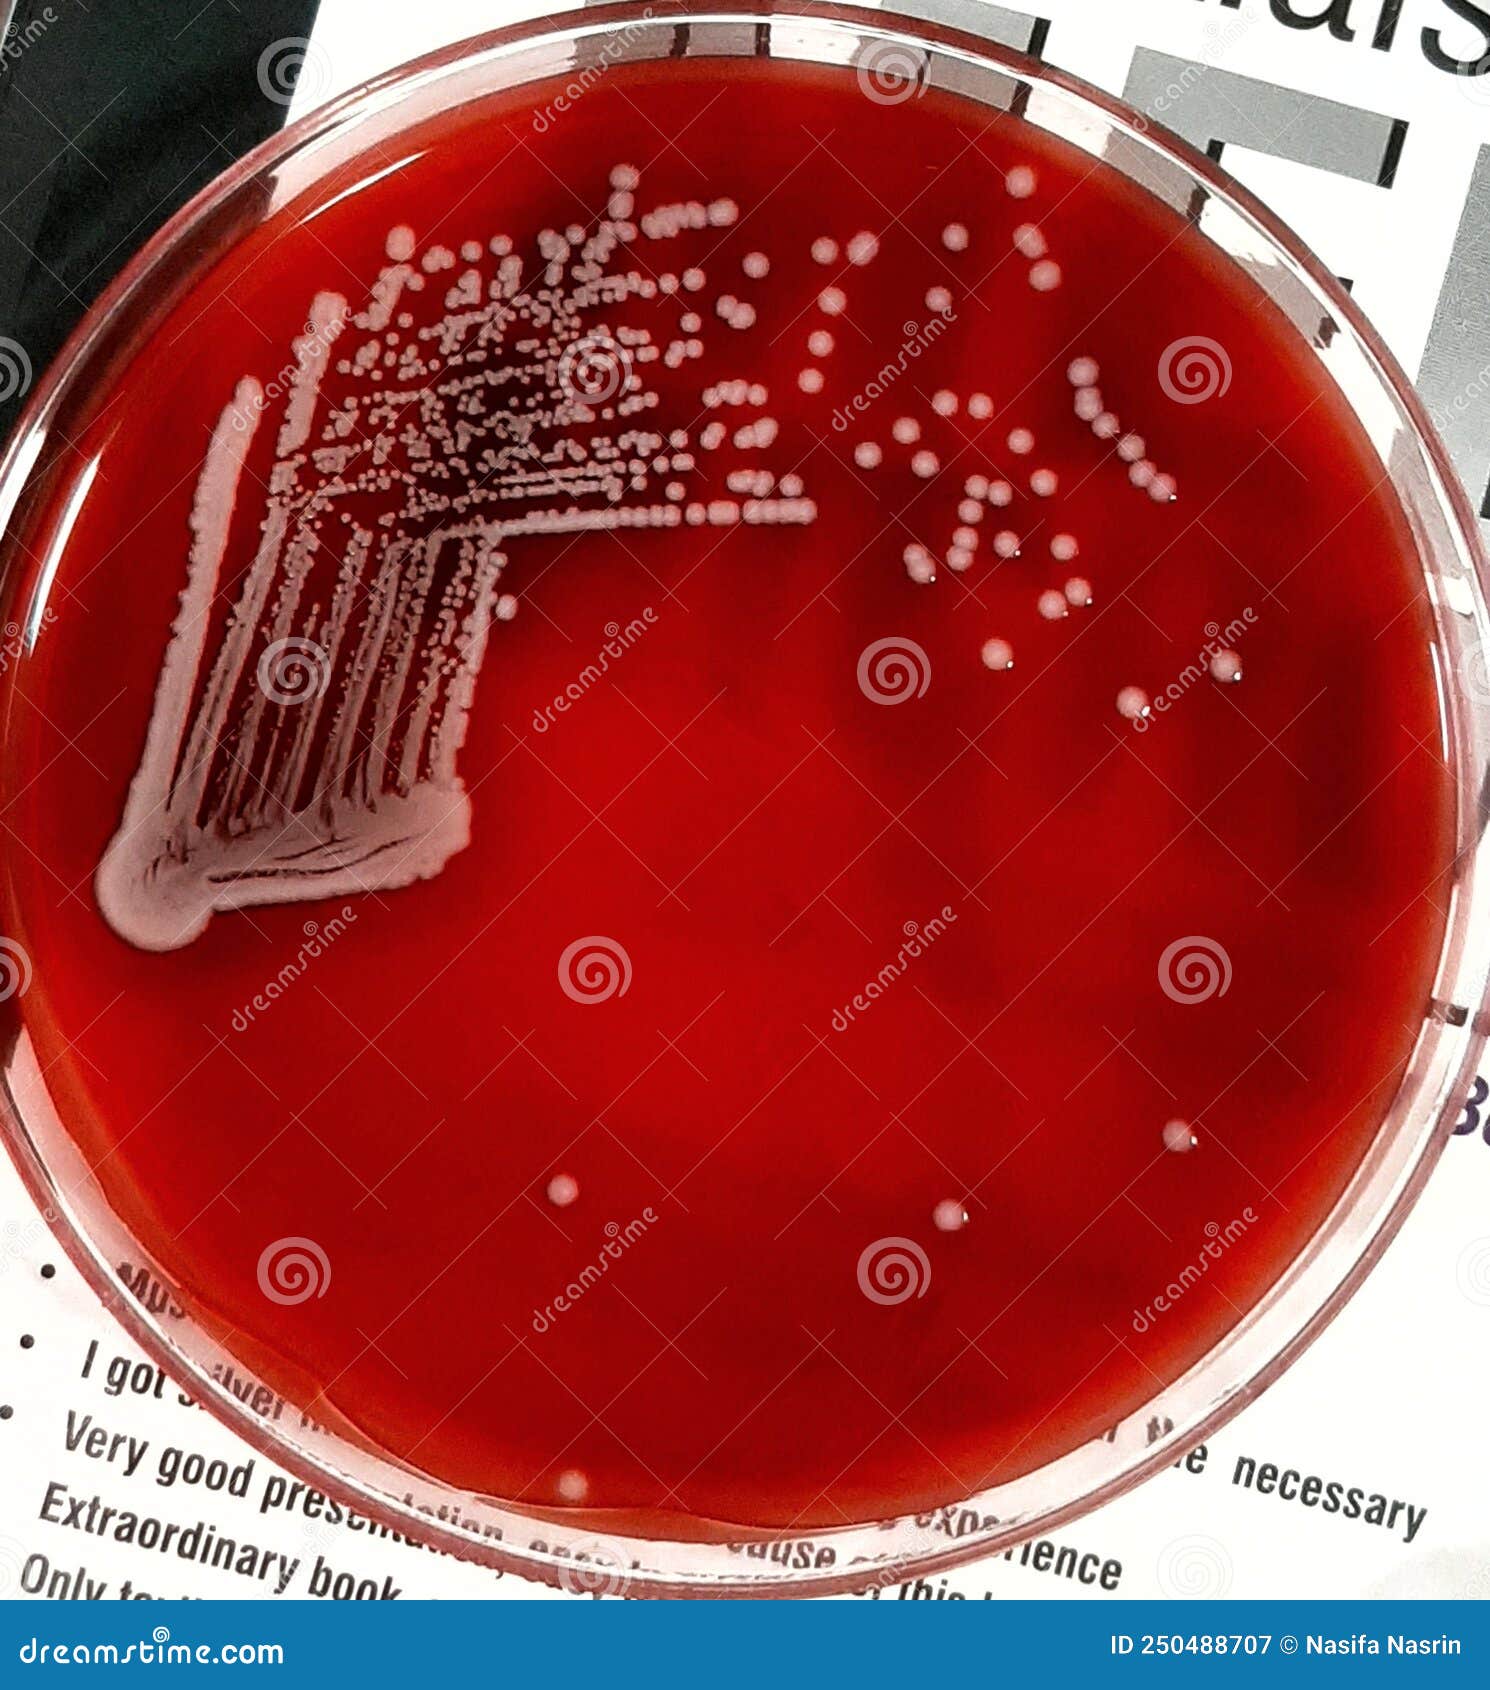 A Shot Of White Non Hemolytic Colonies Of E Coli Bacteria On Blood Agar